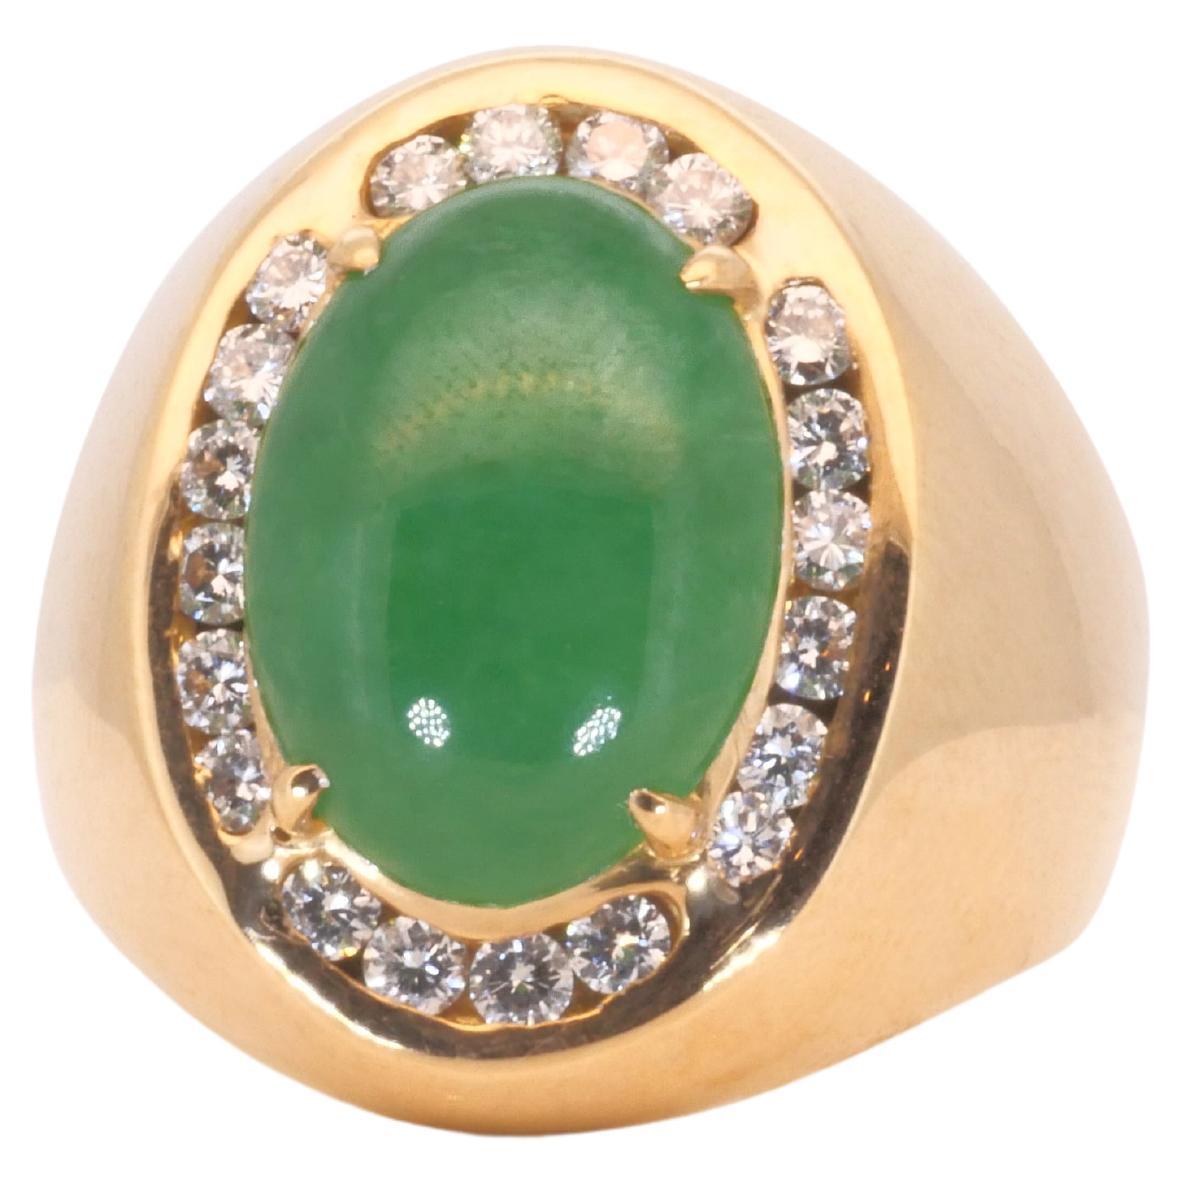 An elegant dome ring with a dazzling 2 carat oval natural jade. It has 0.4 carat of side diamonds which add more to its elegance. The jewelry is made of 18k yellow gold with a high quality polish. It comes with a fancy jewelry box.

1 jade main